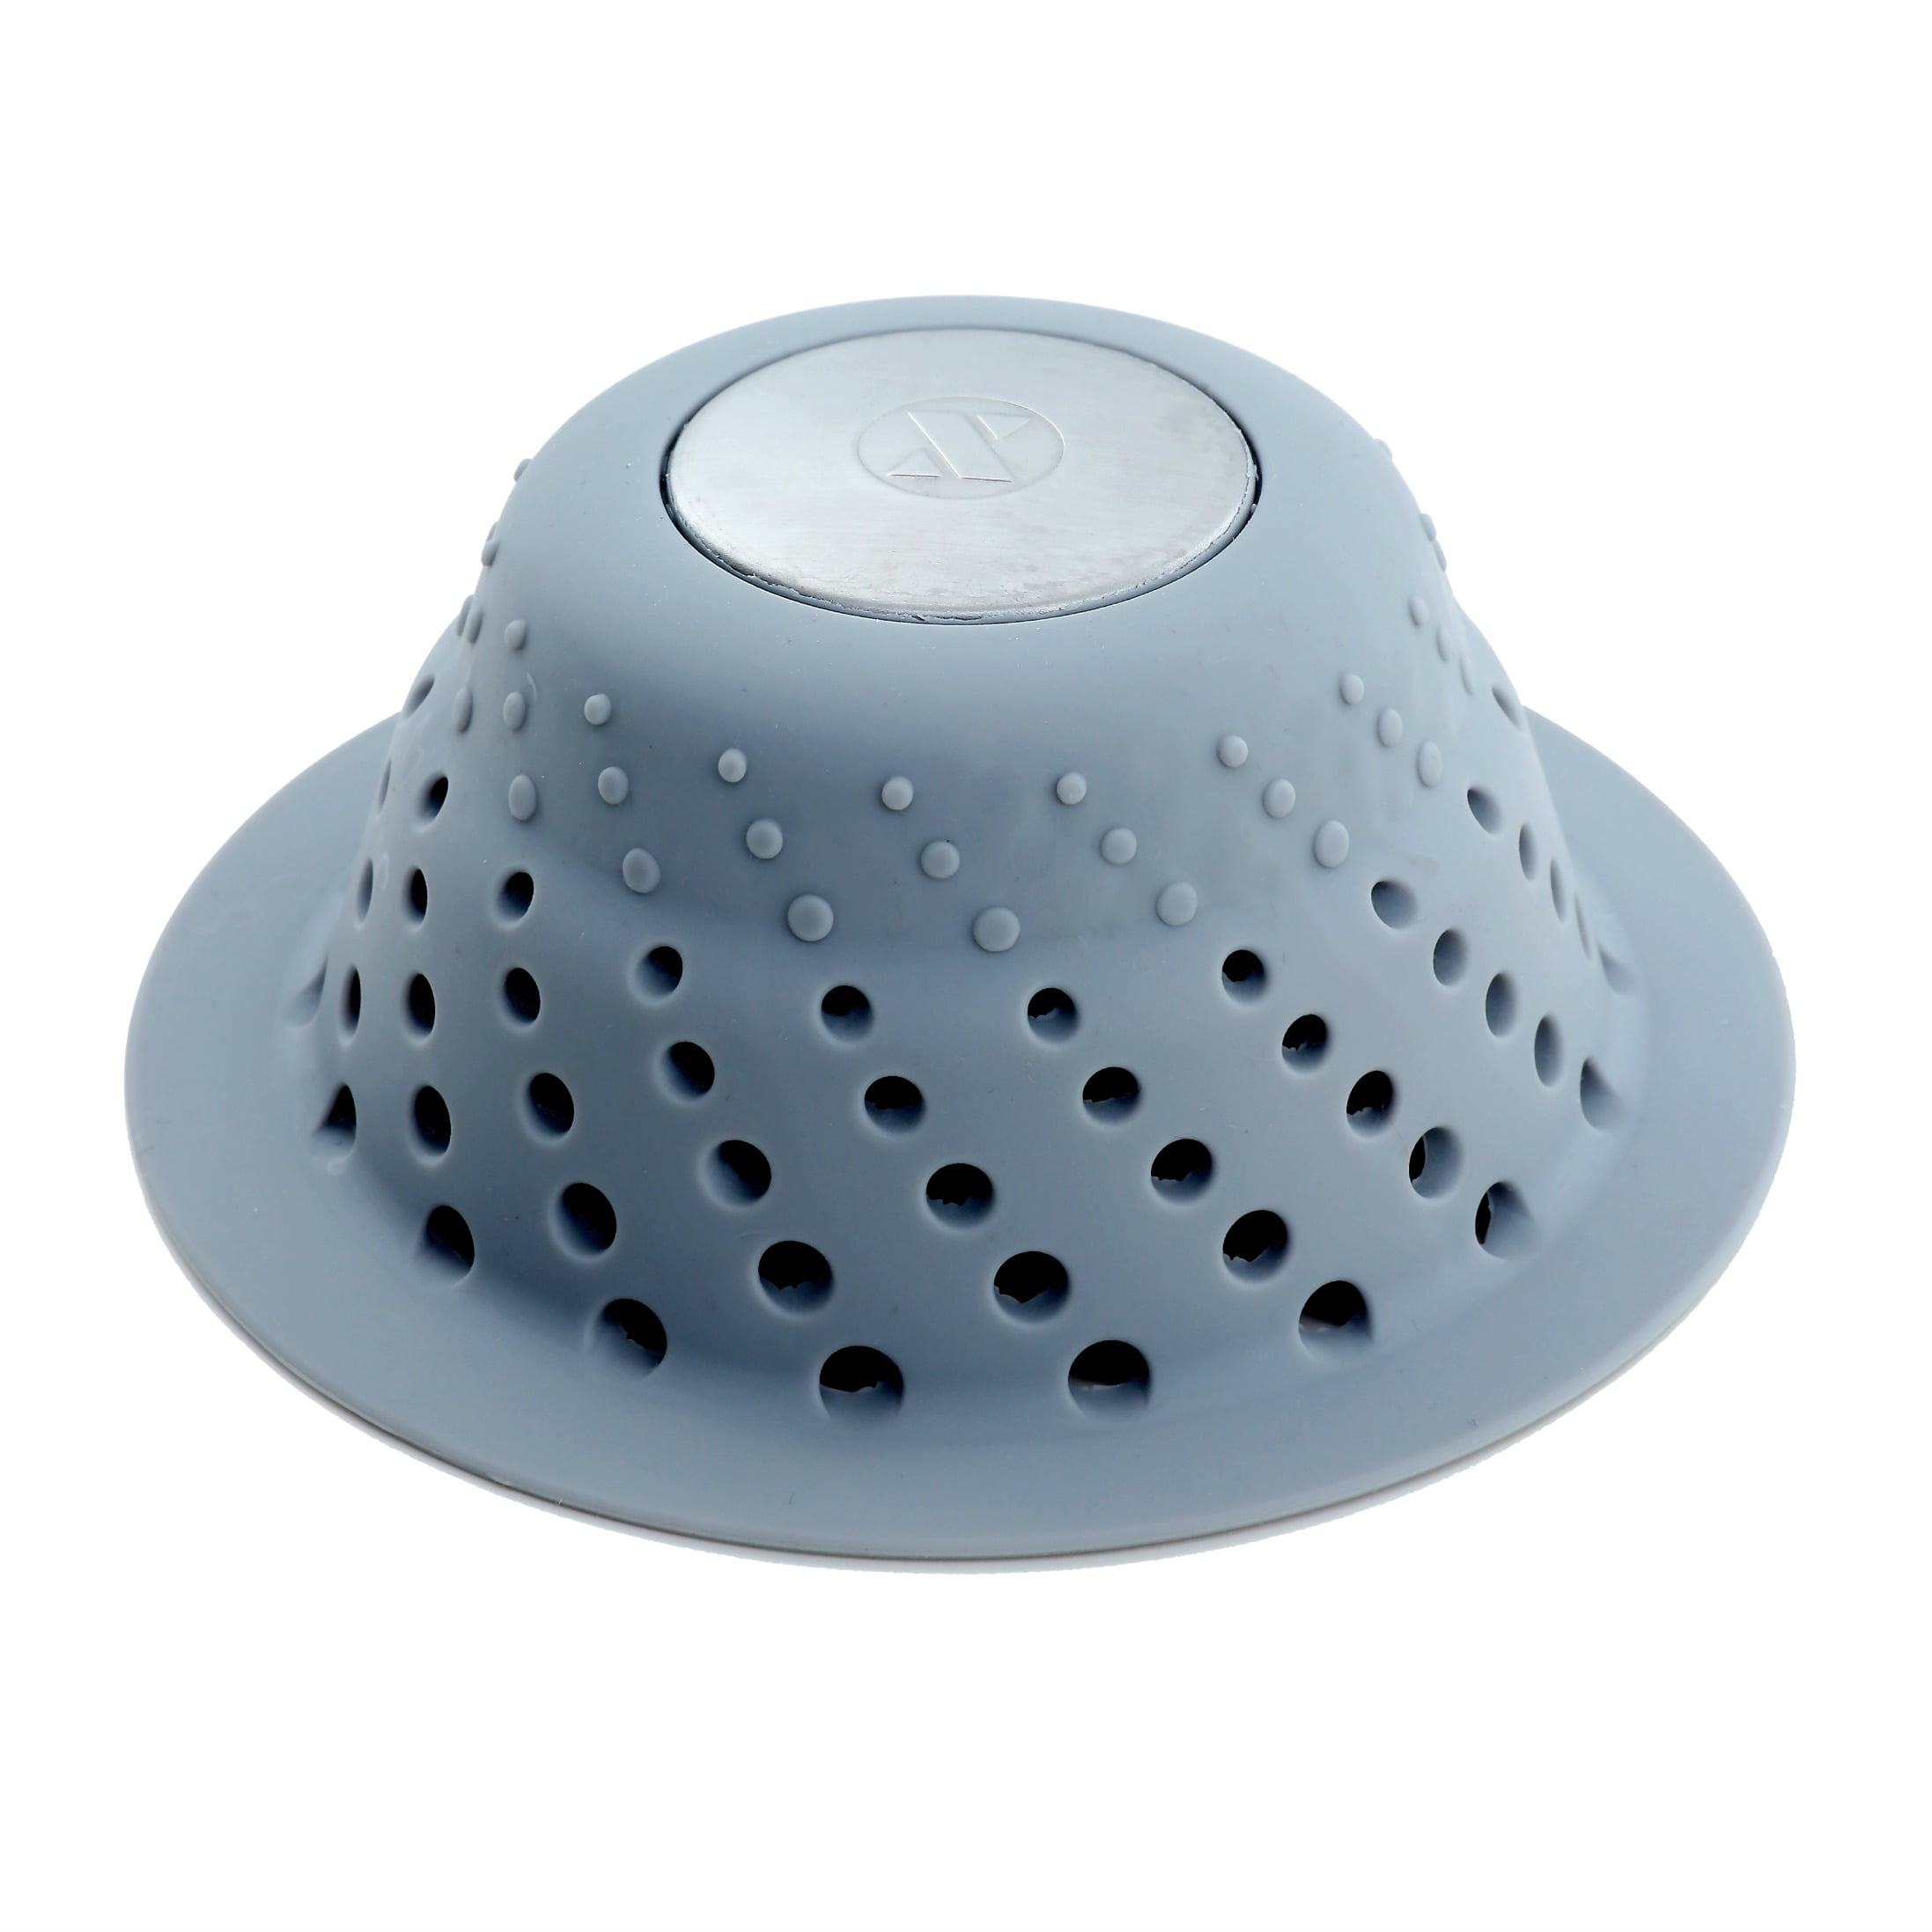 SlipX Solutions Dome Drain Protector, Hair Catcher (Silicone and